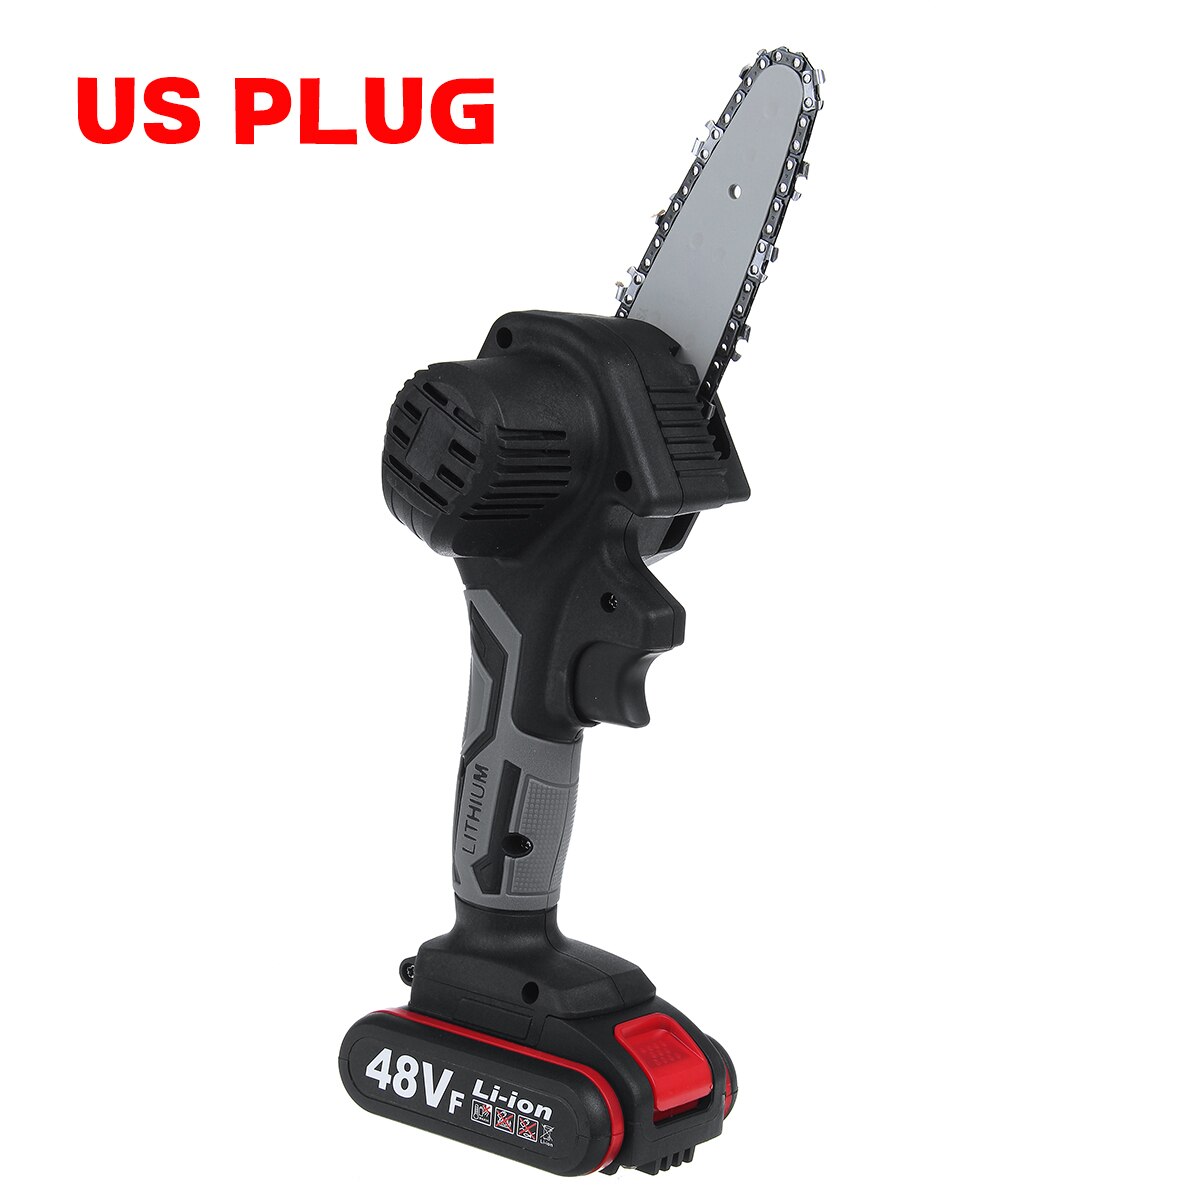 48V Cordless Electric Chain Saw 4inch Portable Electric Saw Woodworking Cutting DIY Tool Electric Pruning Saw With 1 Battery: US Plug